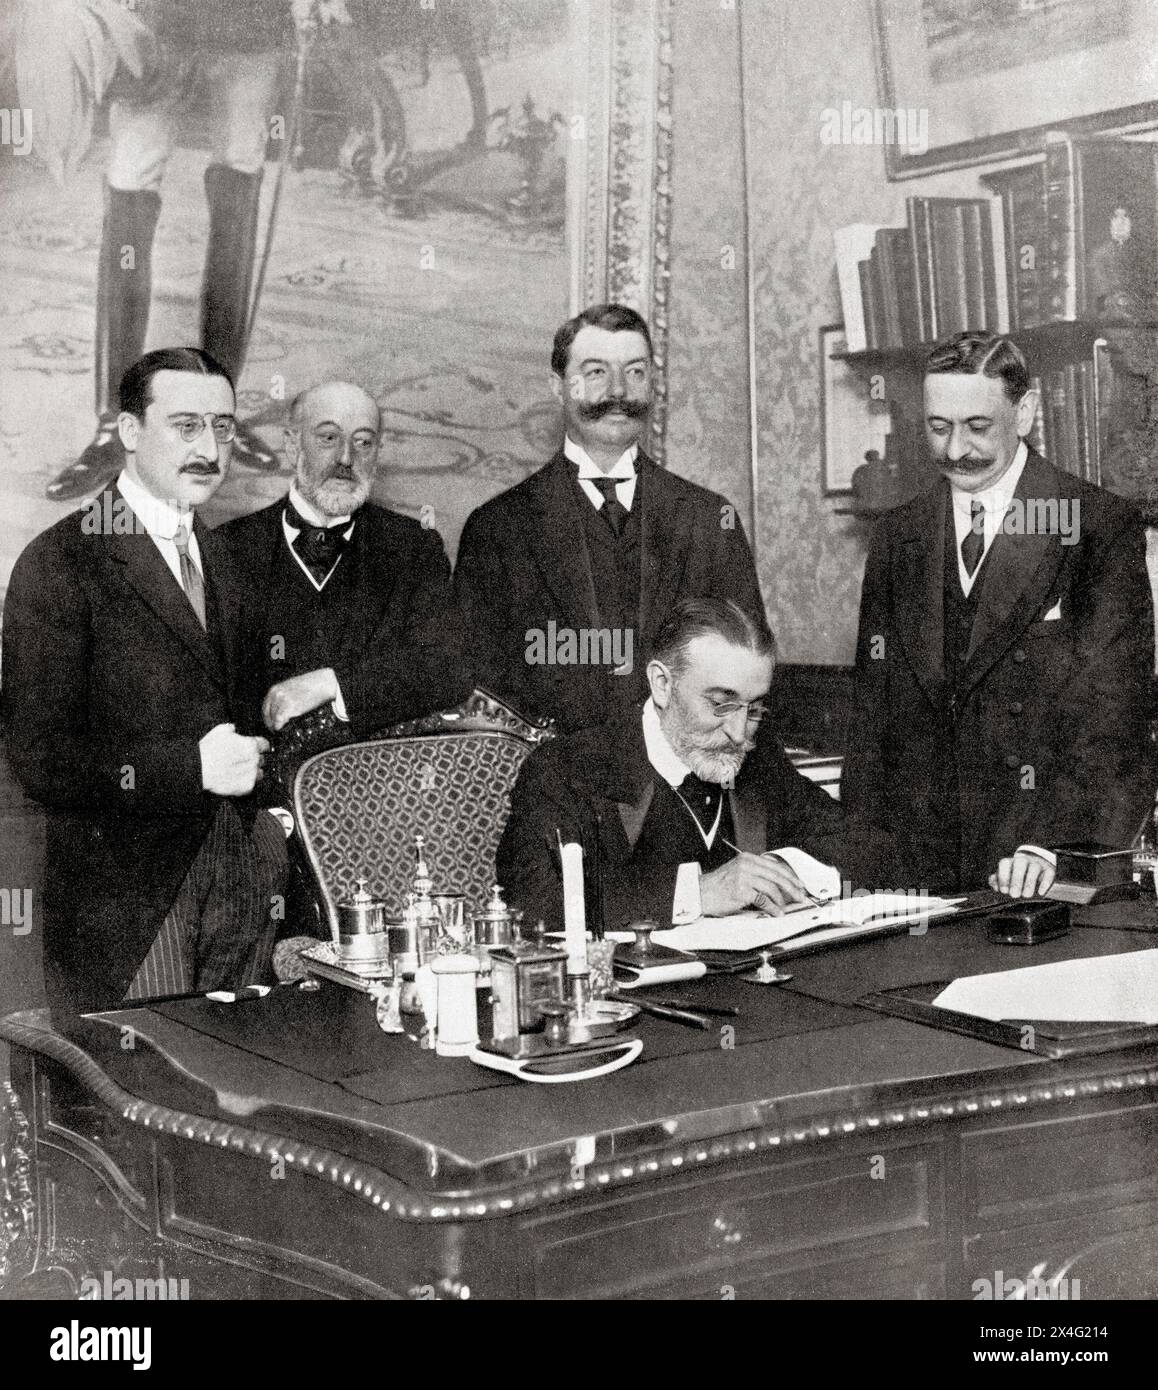 The signing of the Treaty between France and Spain regarding Morocco on 27 November 1912 by Léon Geoffray, seated, and Manuel García Prieto, standing far right.   Léon Marcel Isidore Geoffray, 1852–1927. French diplomat and Ambassador to Madrid. Manuel García Prieto, 1st Marquis of Alhucemas, 1859 – 1938. Spanish politician and prime minister of Spain.  From Mundo Grafico, published 1912. Stock Photo